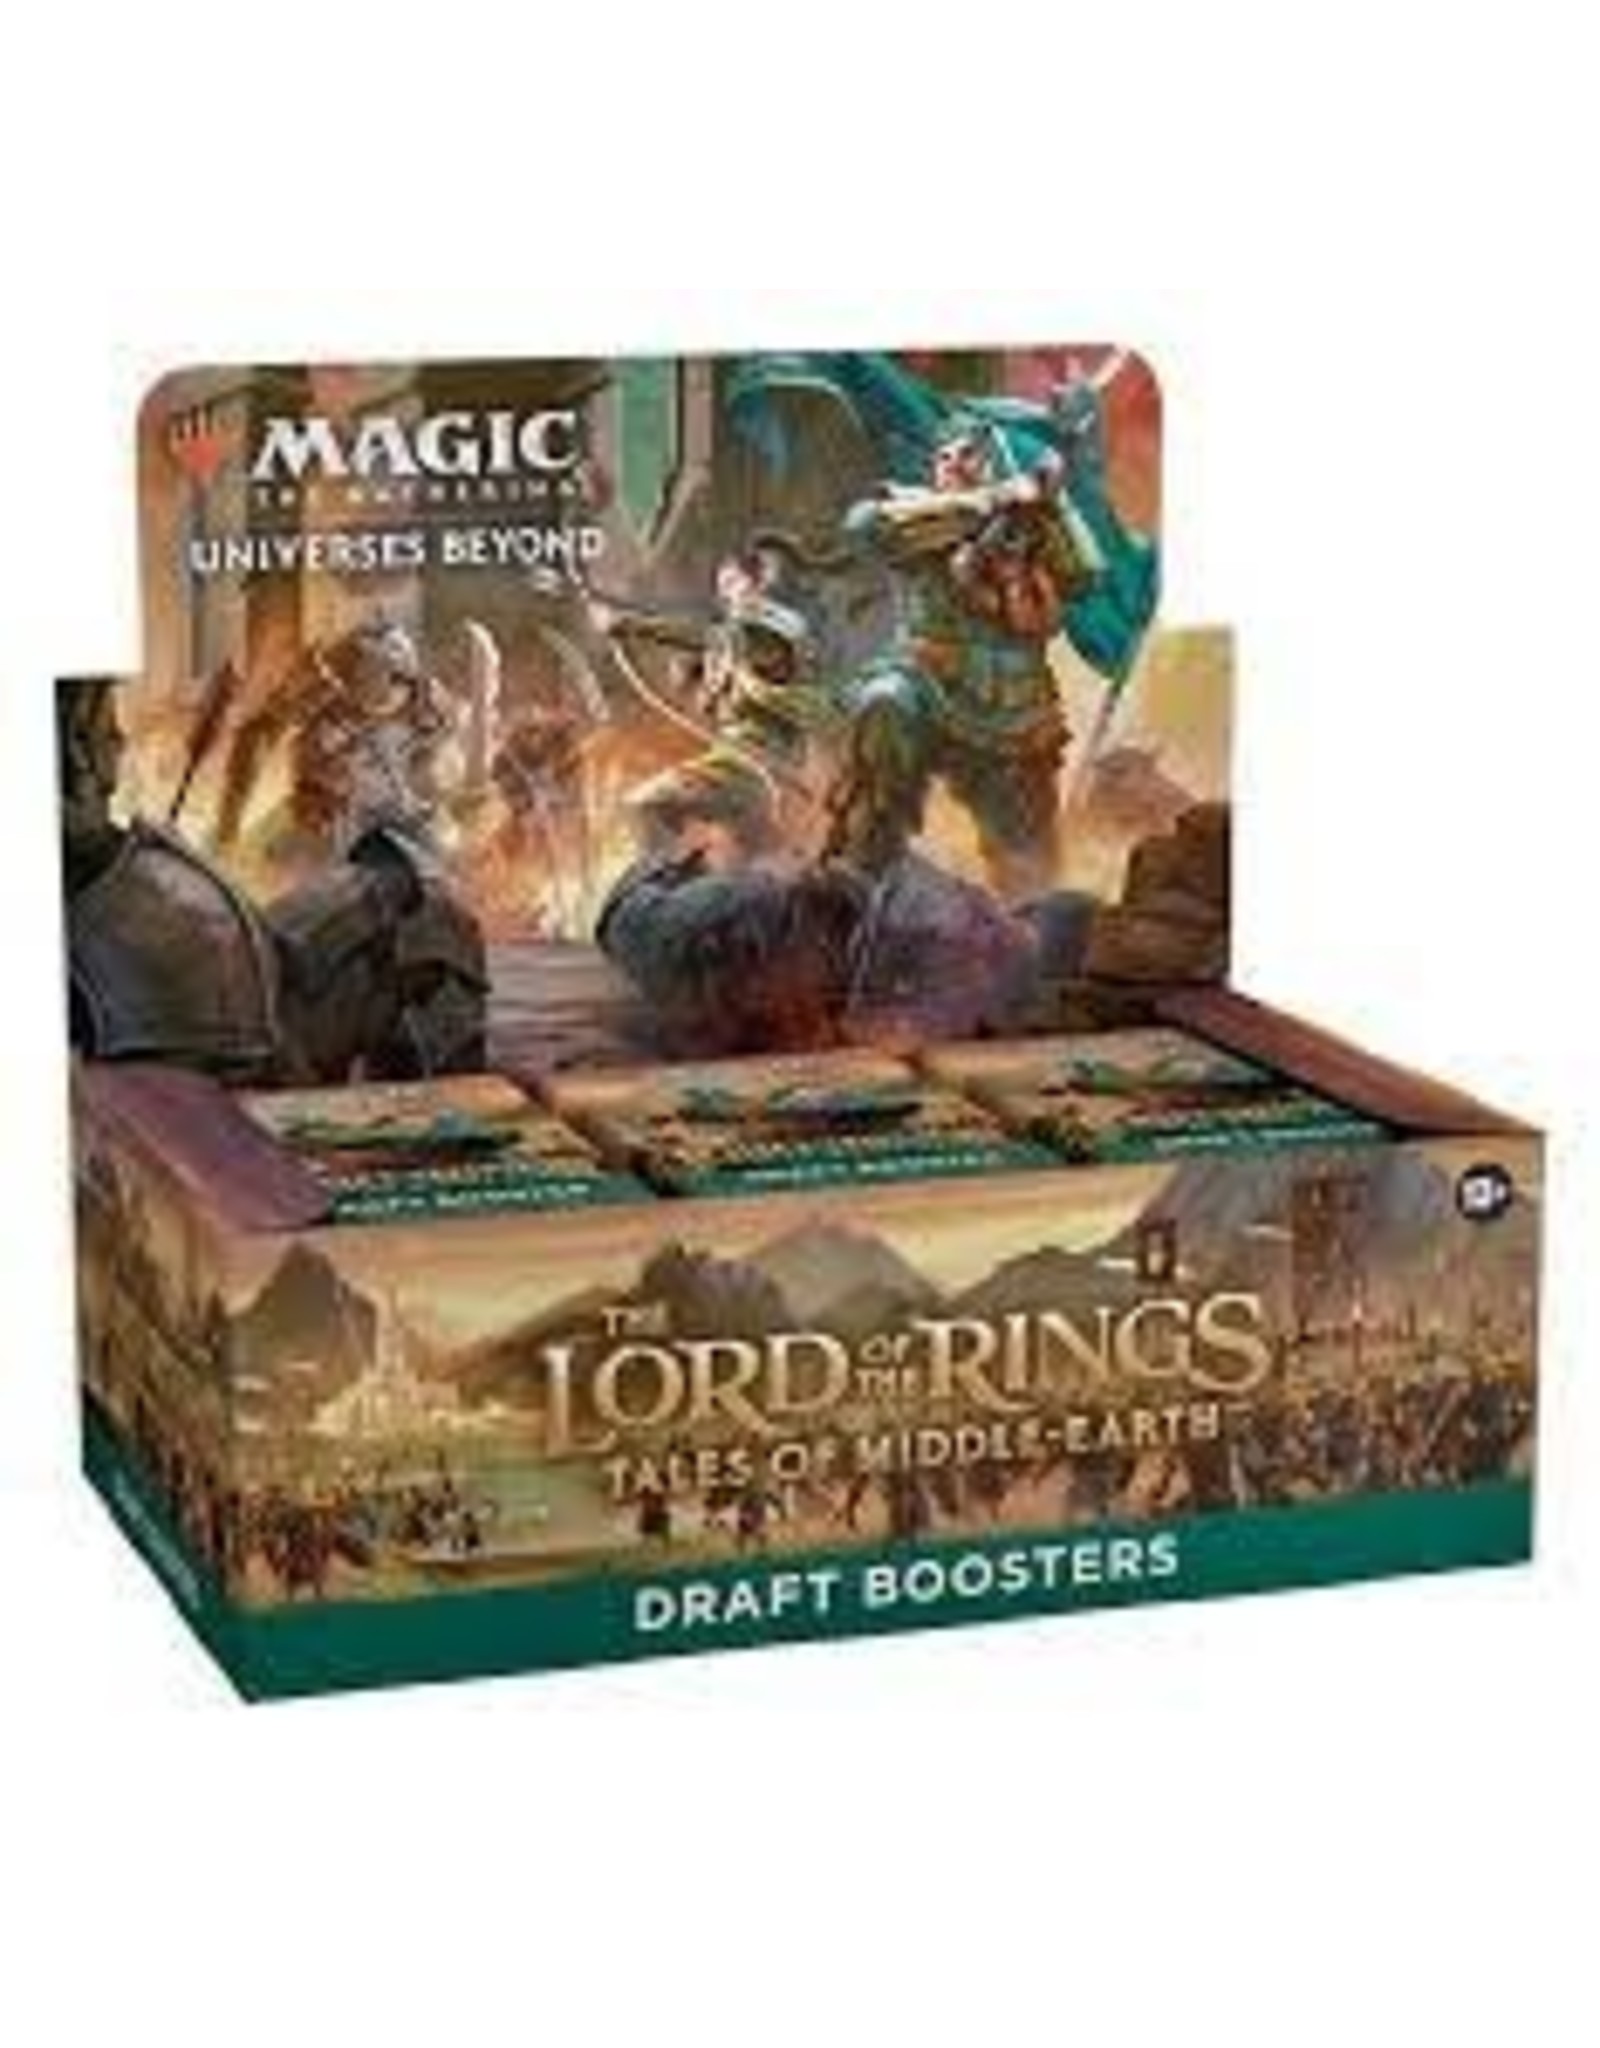 Wizards of the Coast Magic The Gathering CCG: Lord of the Rings Draft Booster Display